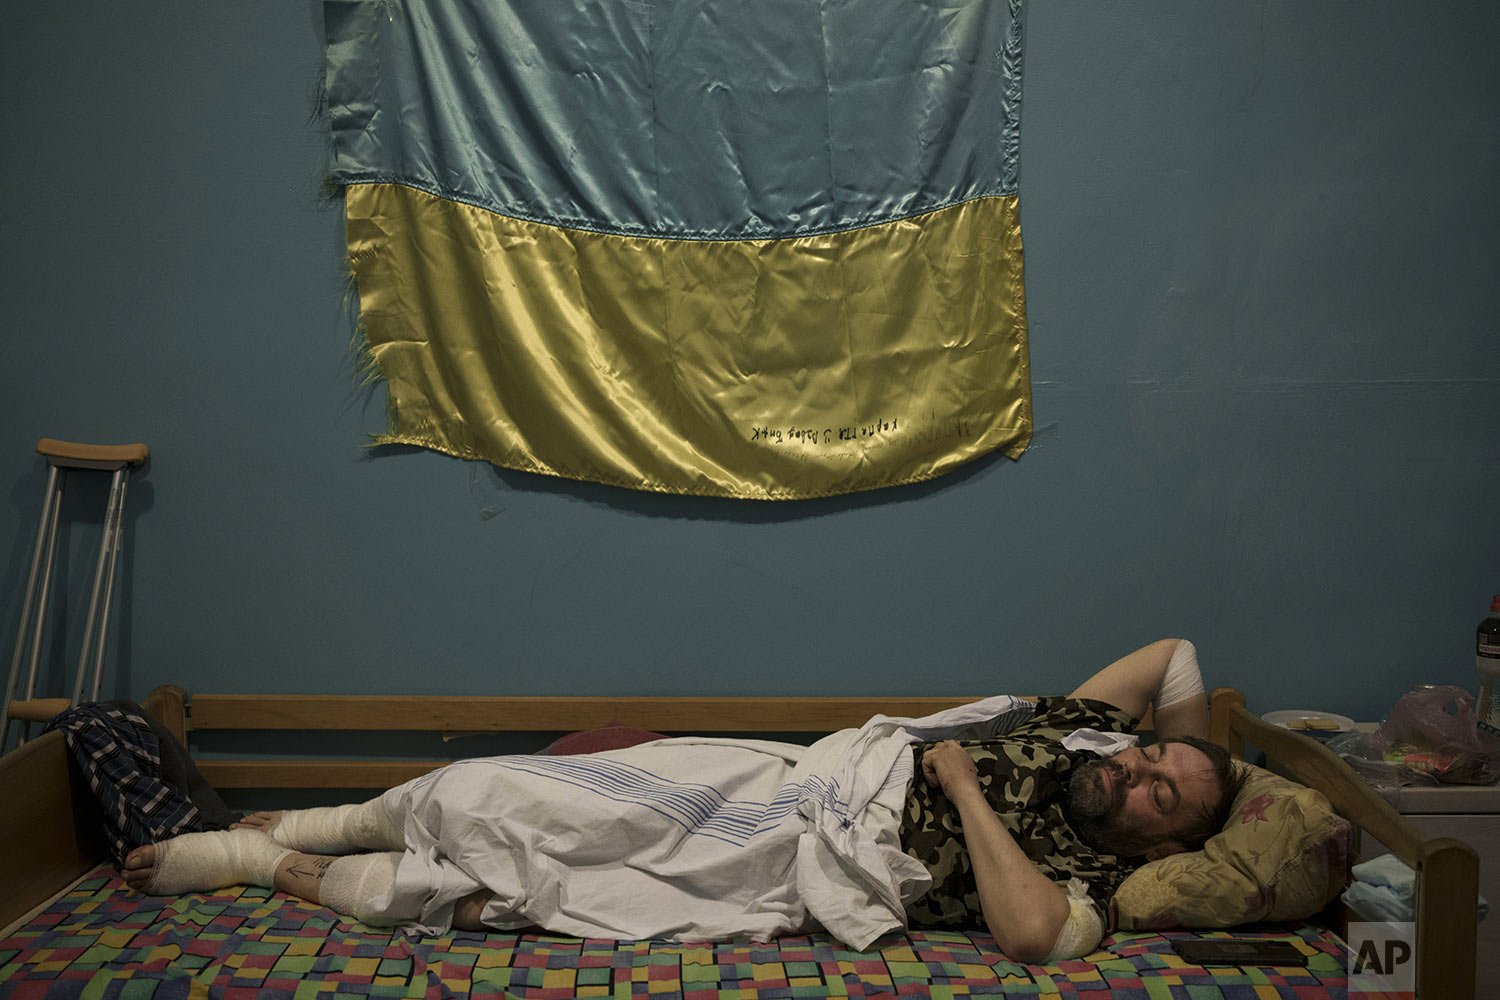  Ukrainian battalion commander "Azimut", 53, rest as he recovers after he was injured in combat against Russian forces, at a military hospital in Zaporizhzhia, Ukraine, Saturday, April 2, 2022. (AP Photo/Felipe Dana) 